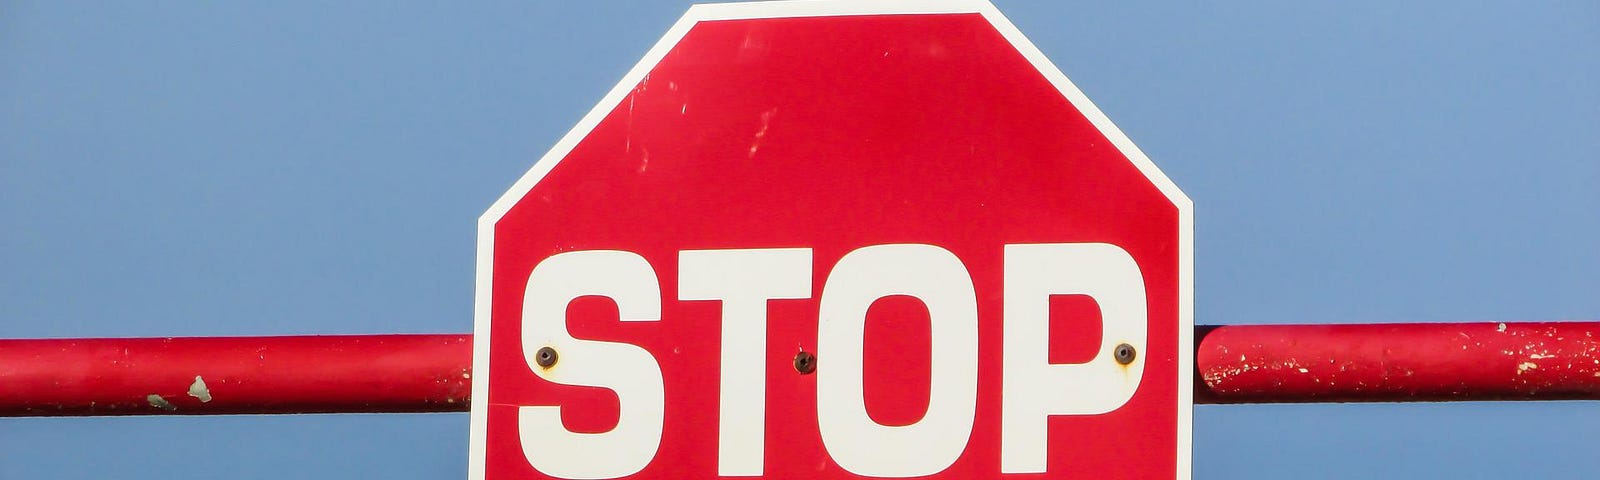 A stop sign bolted to a horizontal crossbar